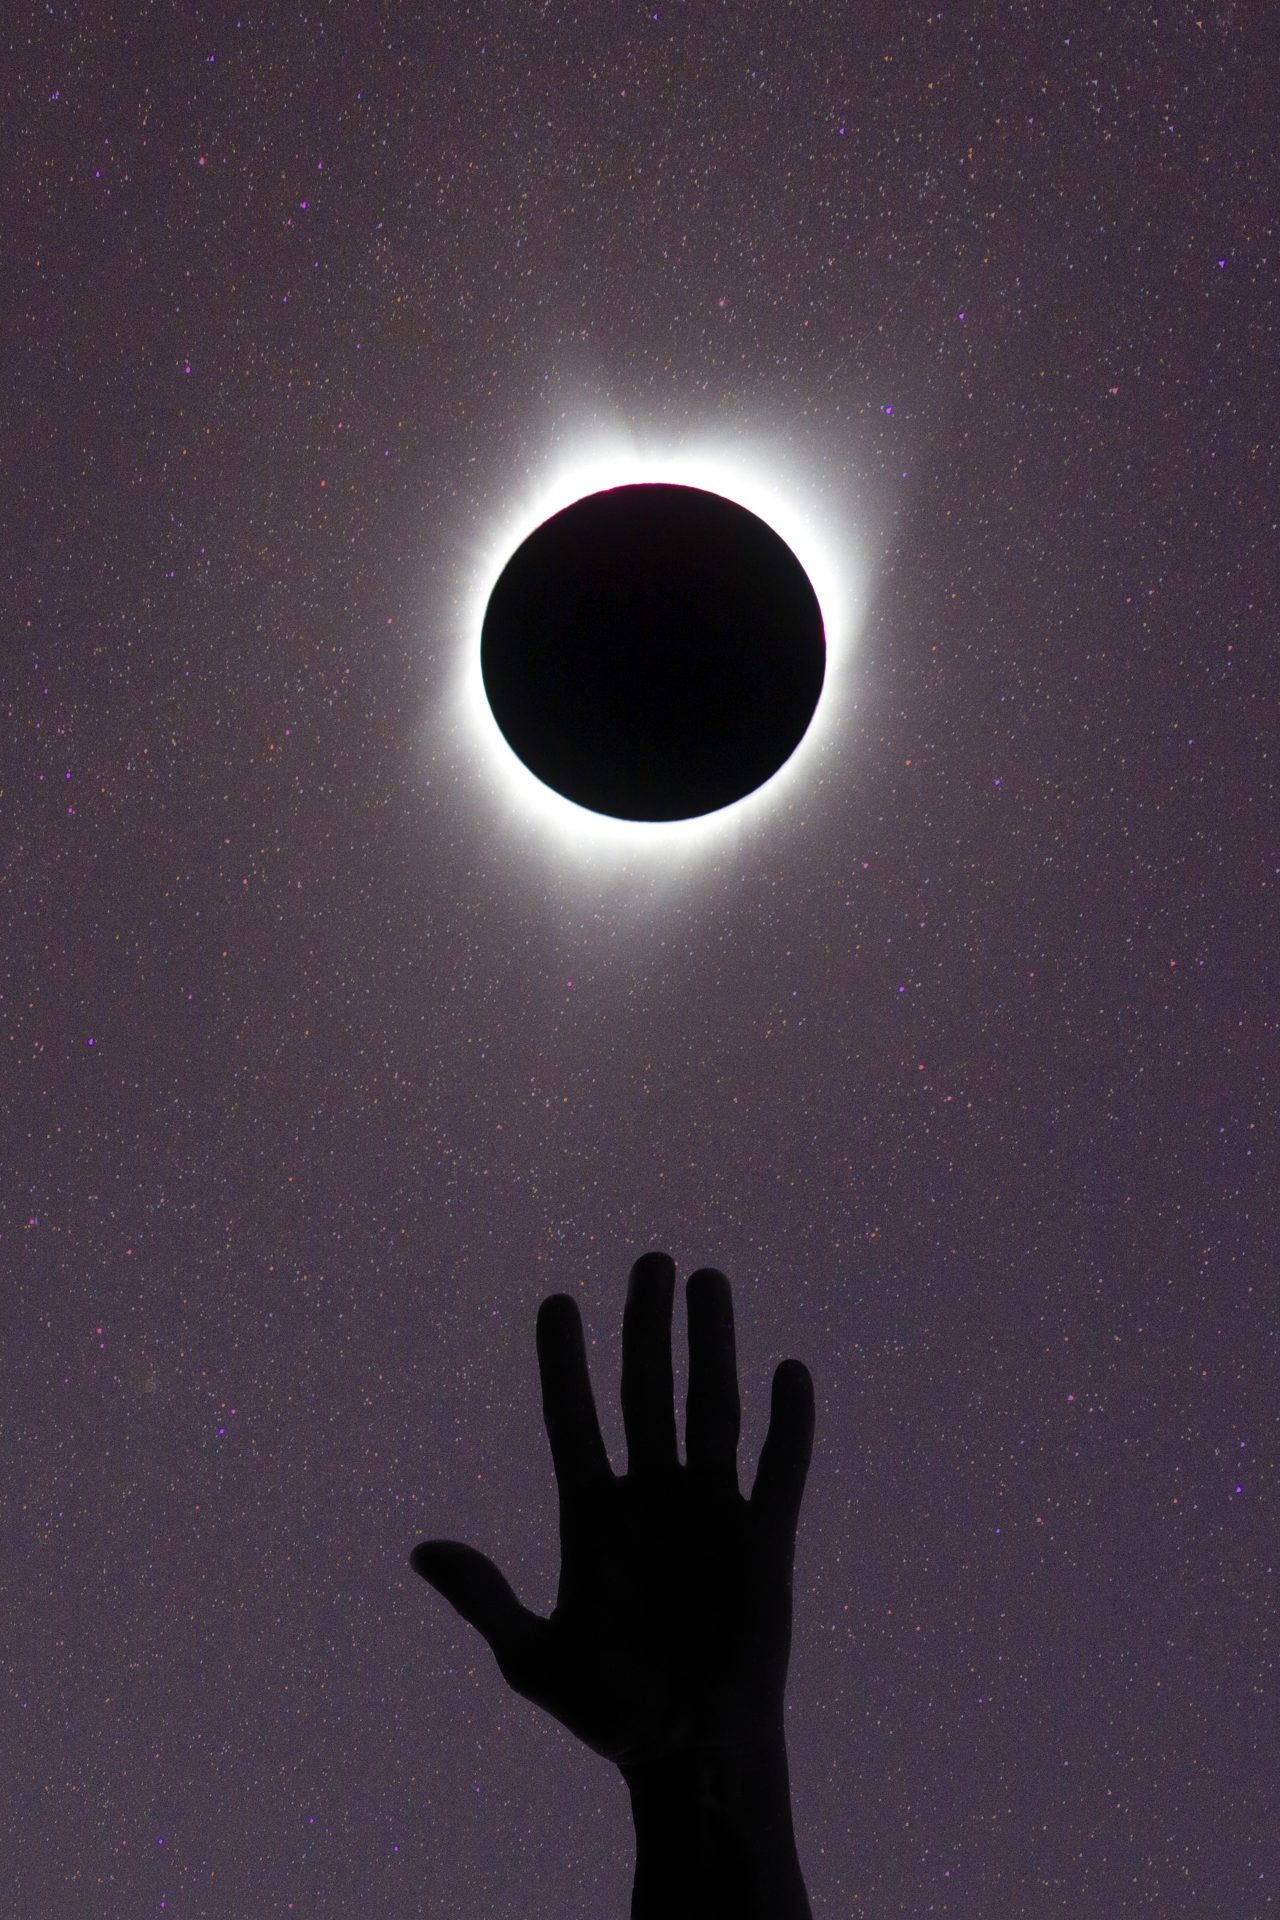 The darkness from the eclipse made observation possible